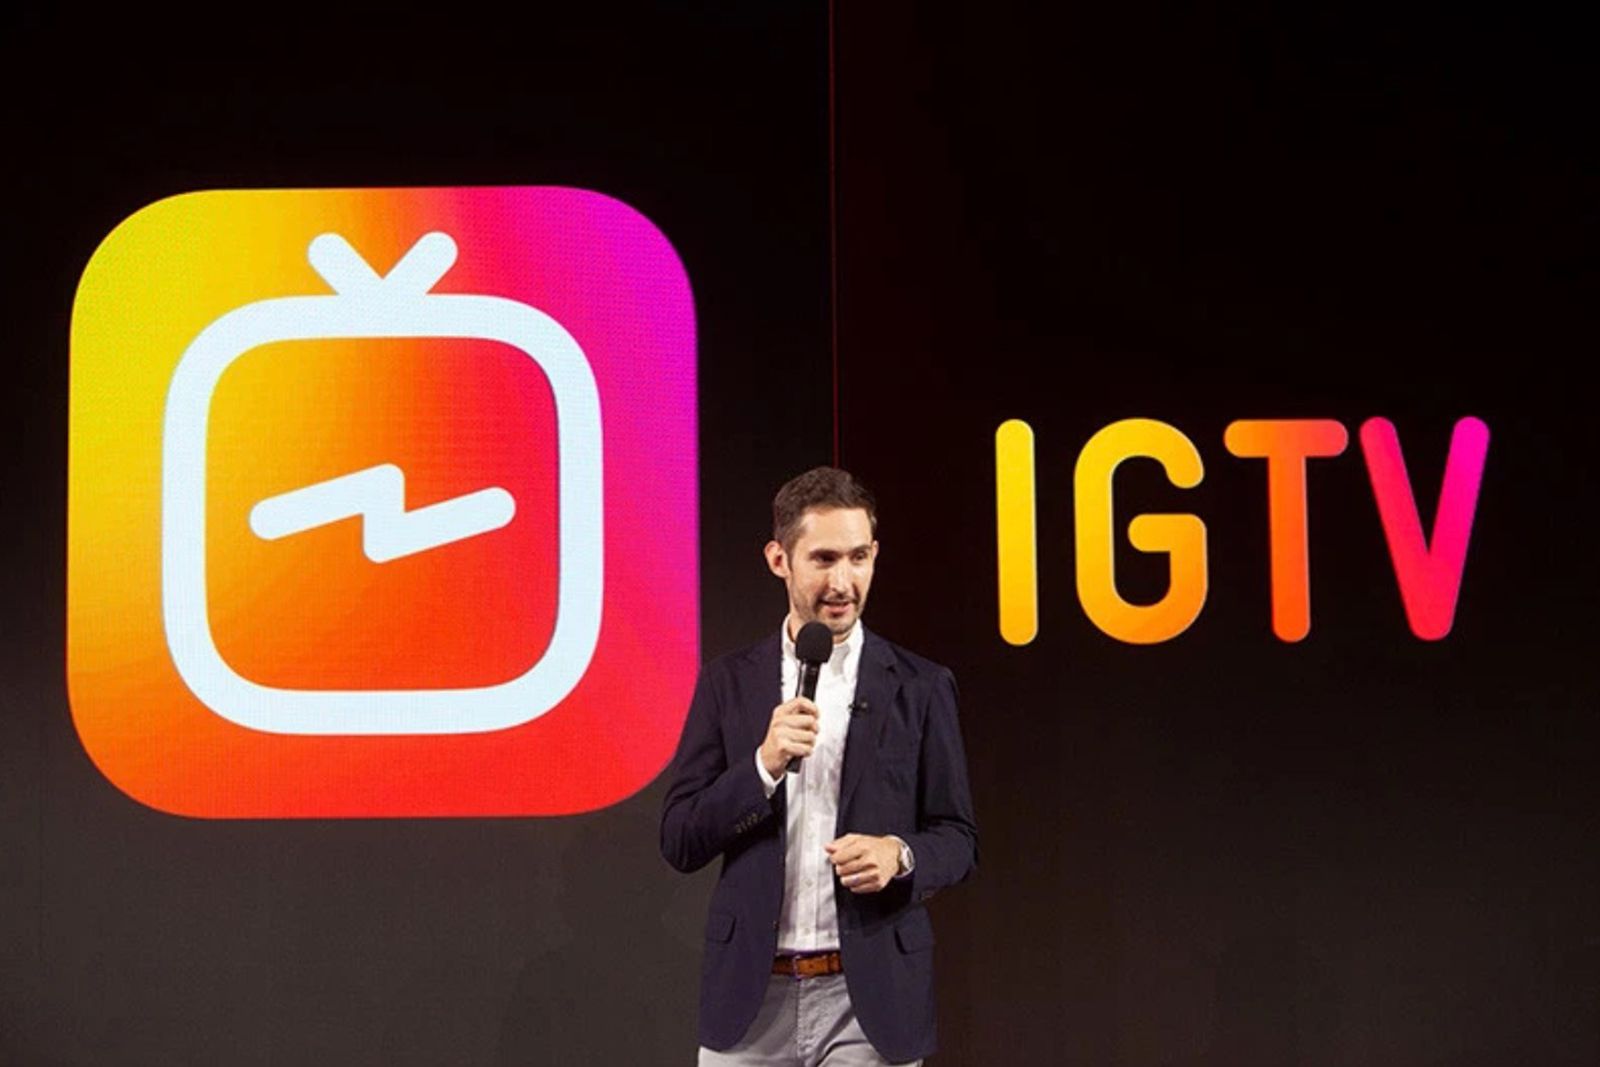 IGTV Everything you need to know about Instagrams video app image 1